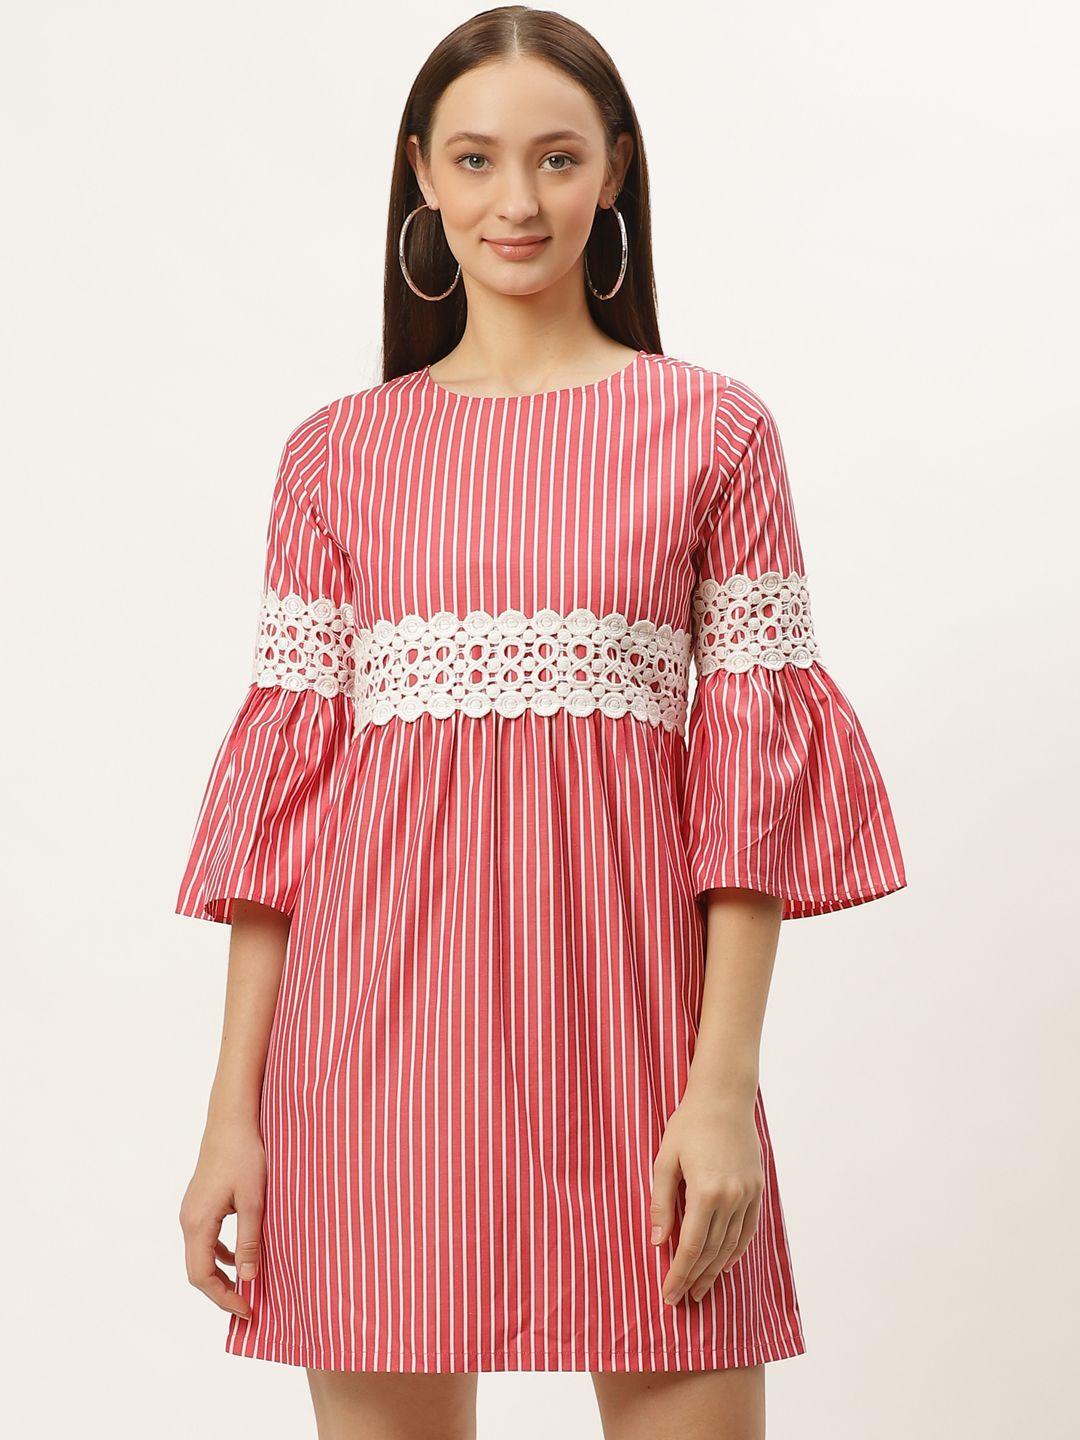 style quotient women coral red & white striped empire dress